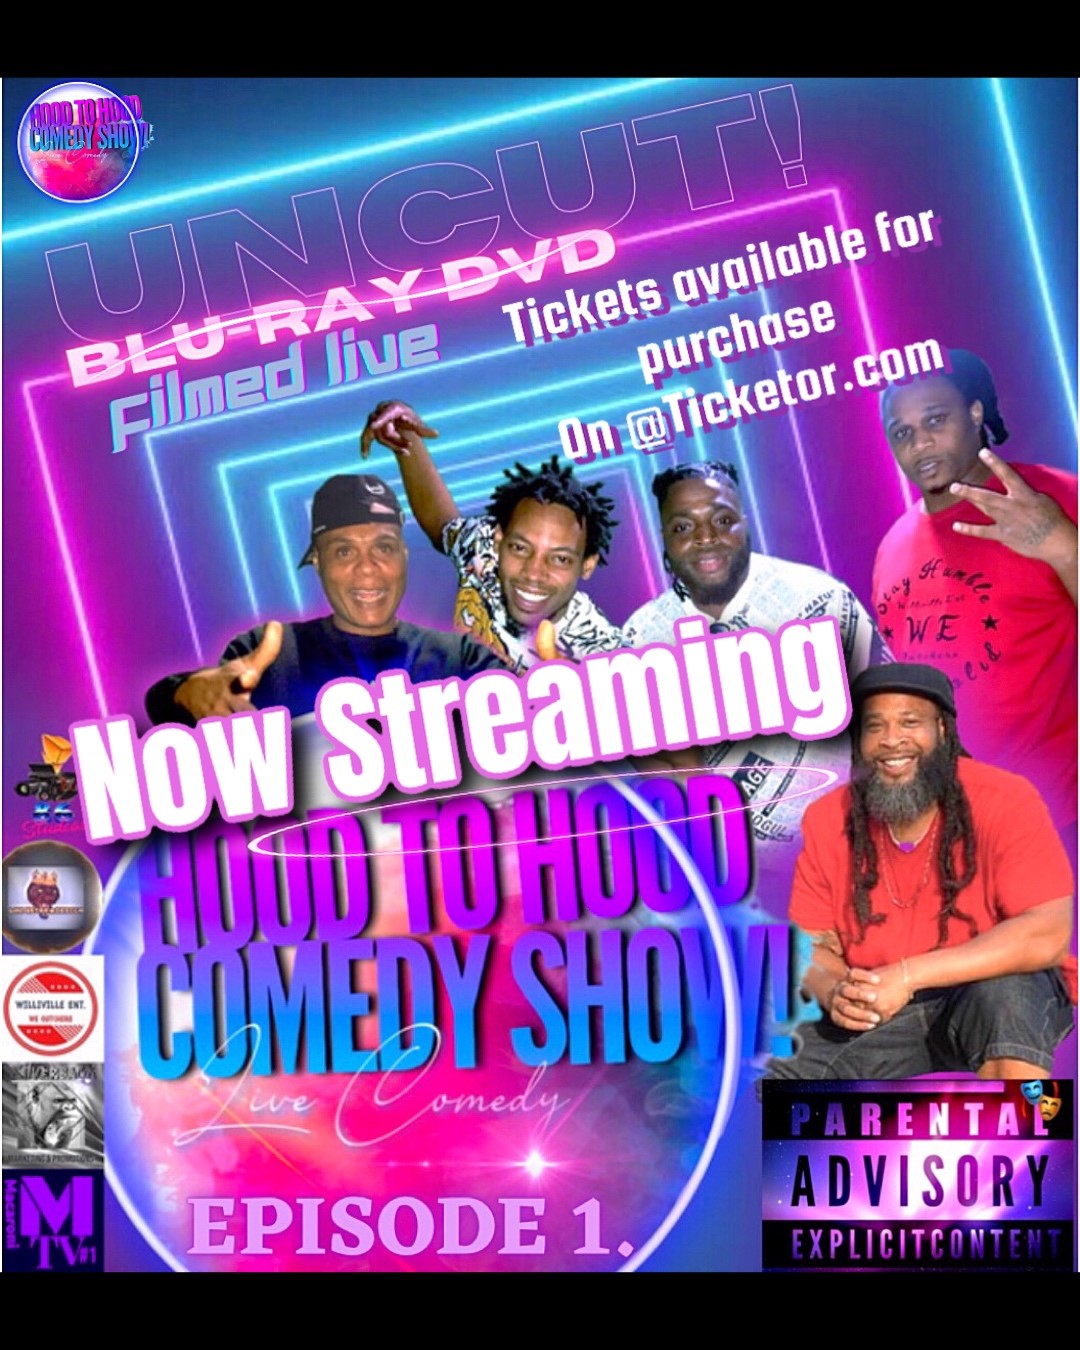 The Hood To Hood Comedy Show Episode 1/Live Stream/Uncut Movie on Oct 08, 20:00@On line @Ticketor.com - Buy tickets and Get information on LMC 5Star Management LLC. 